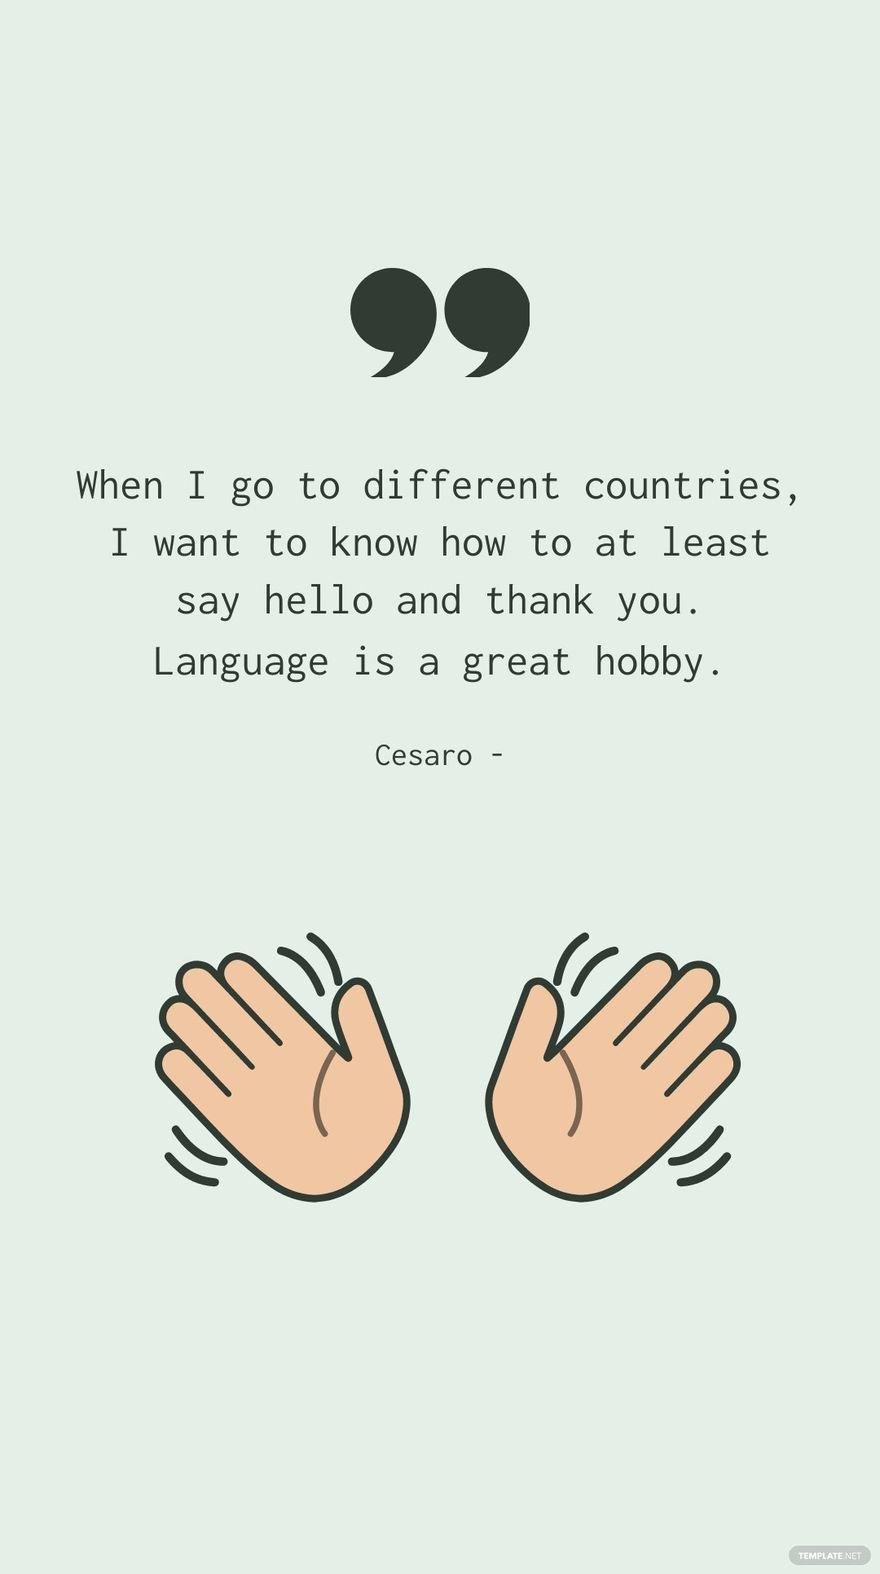 Cesaro - When I go to different countries, I want to know how to at least say hello and thank you. Language is a great hobby.